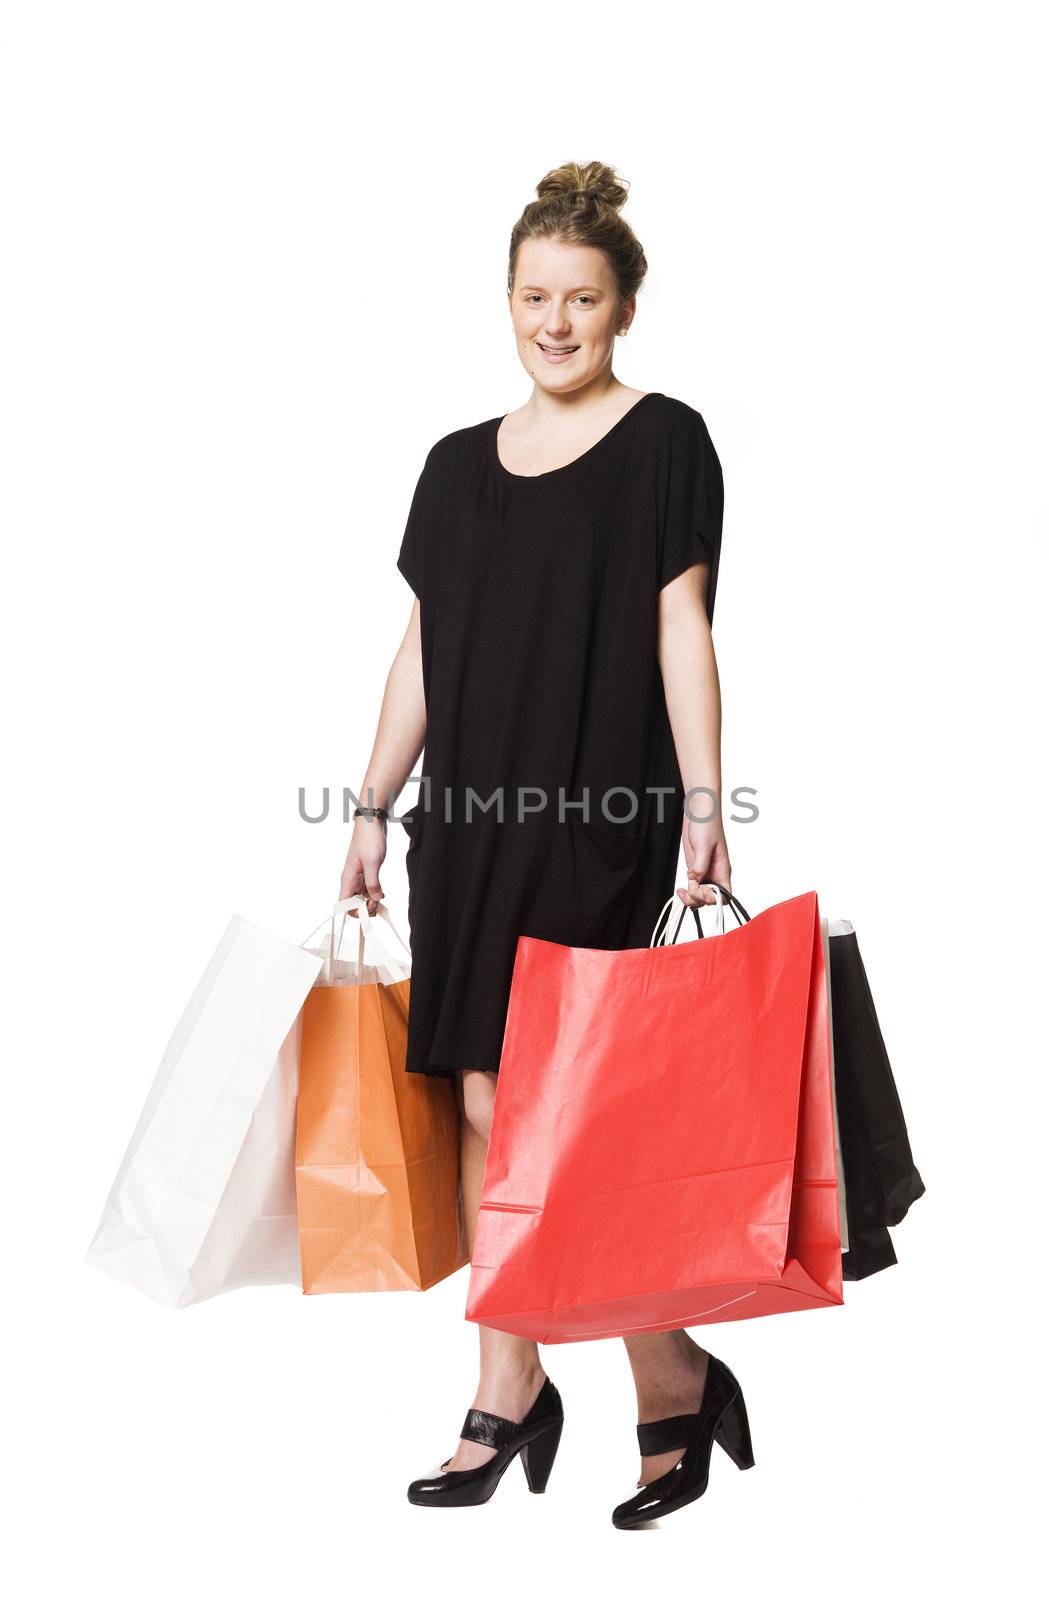 Girl with shoppingbags